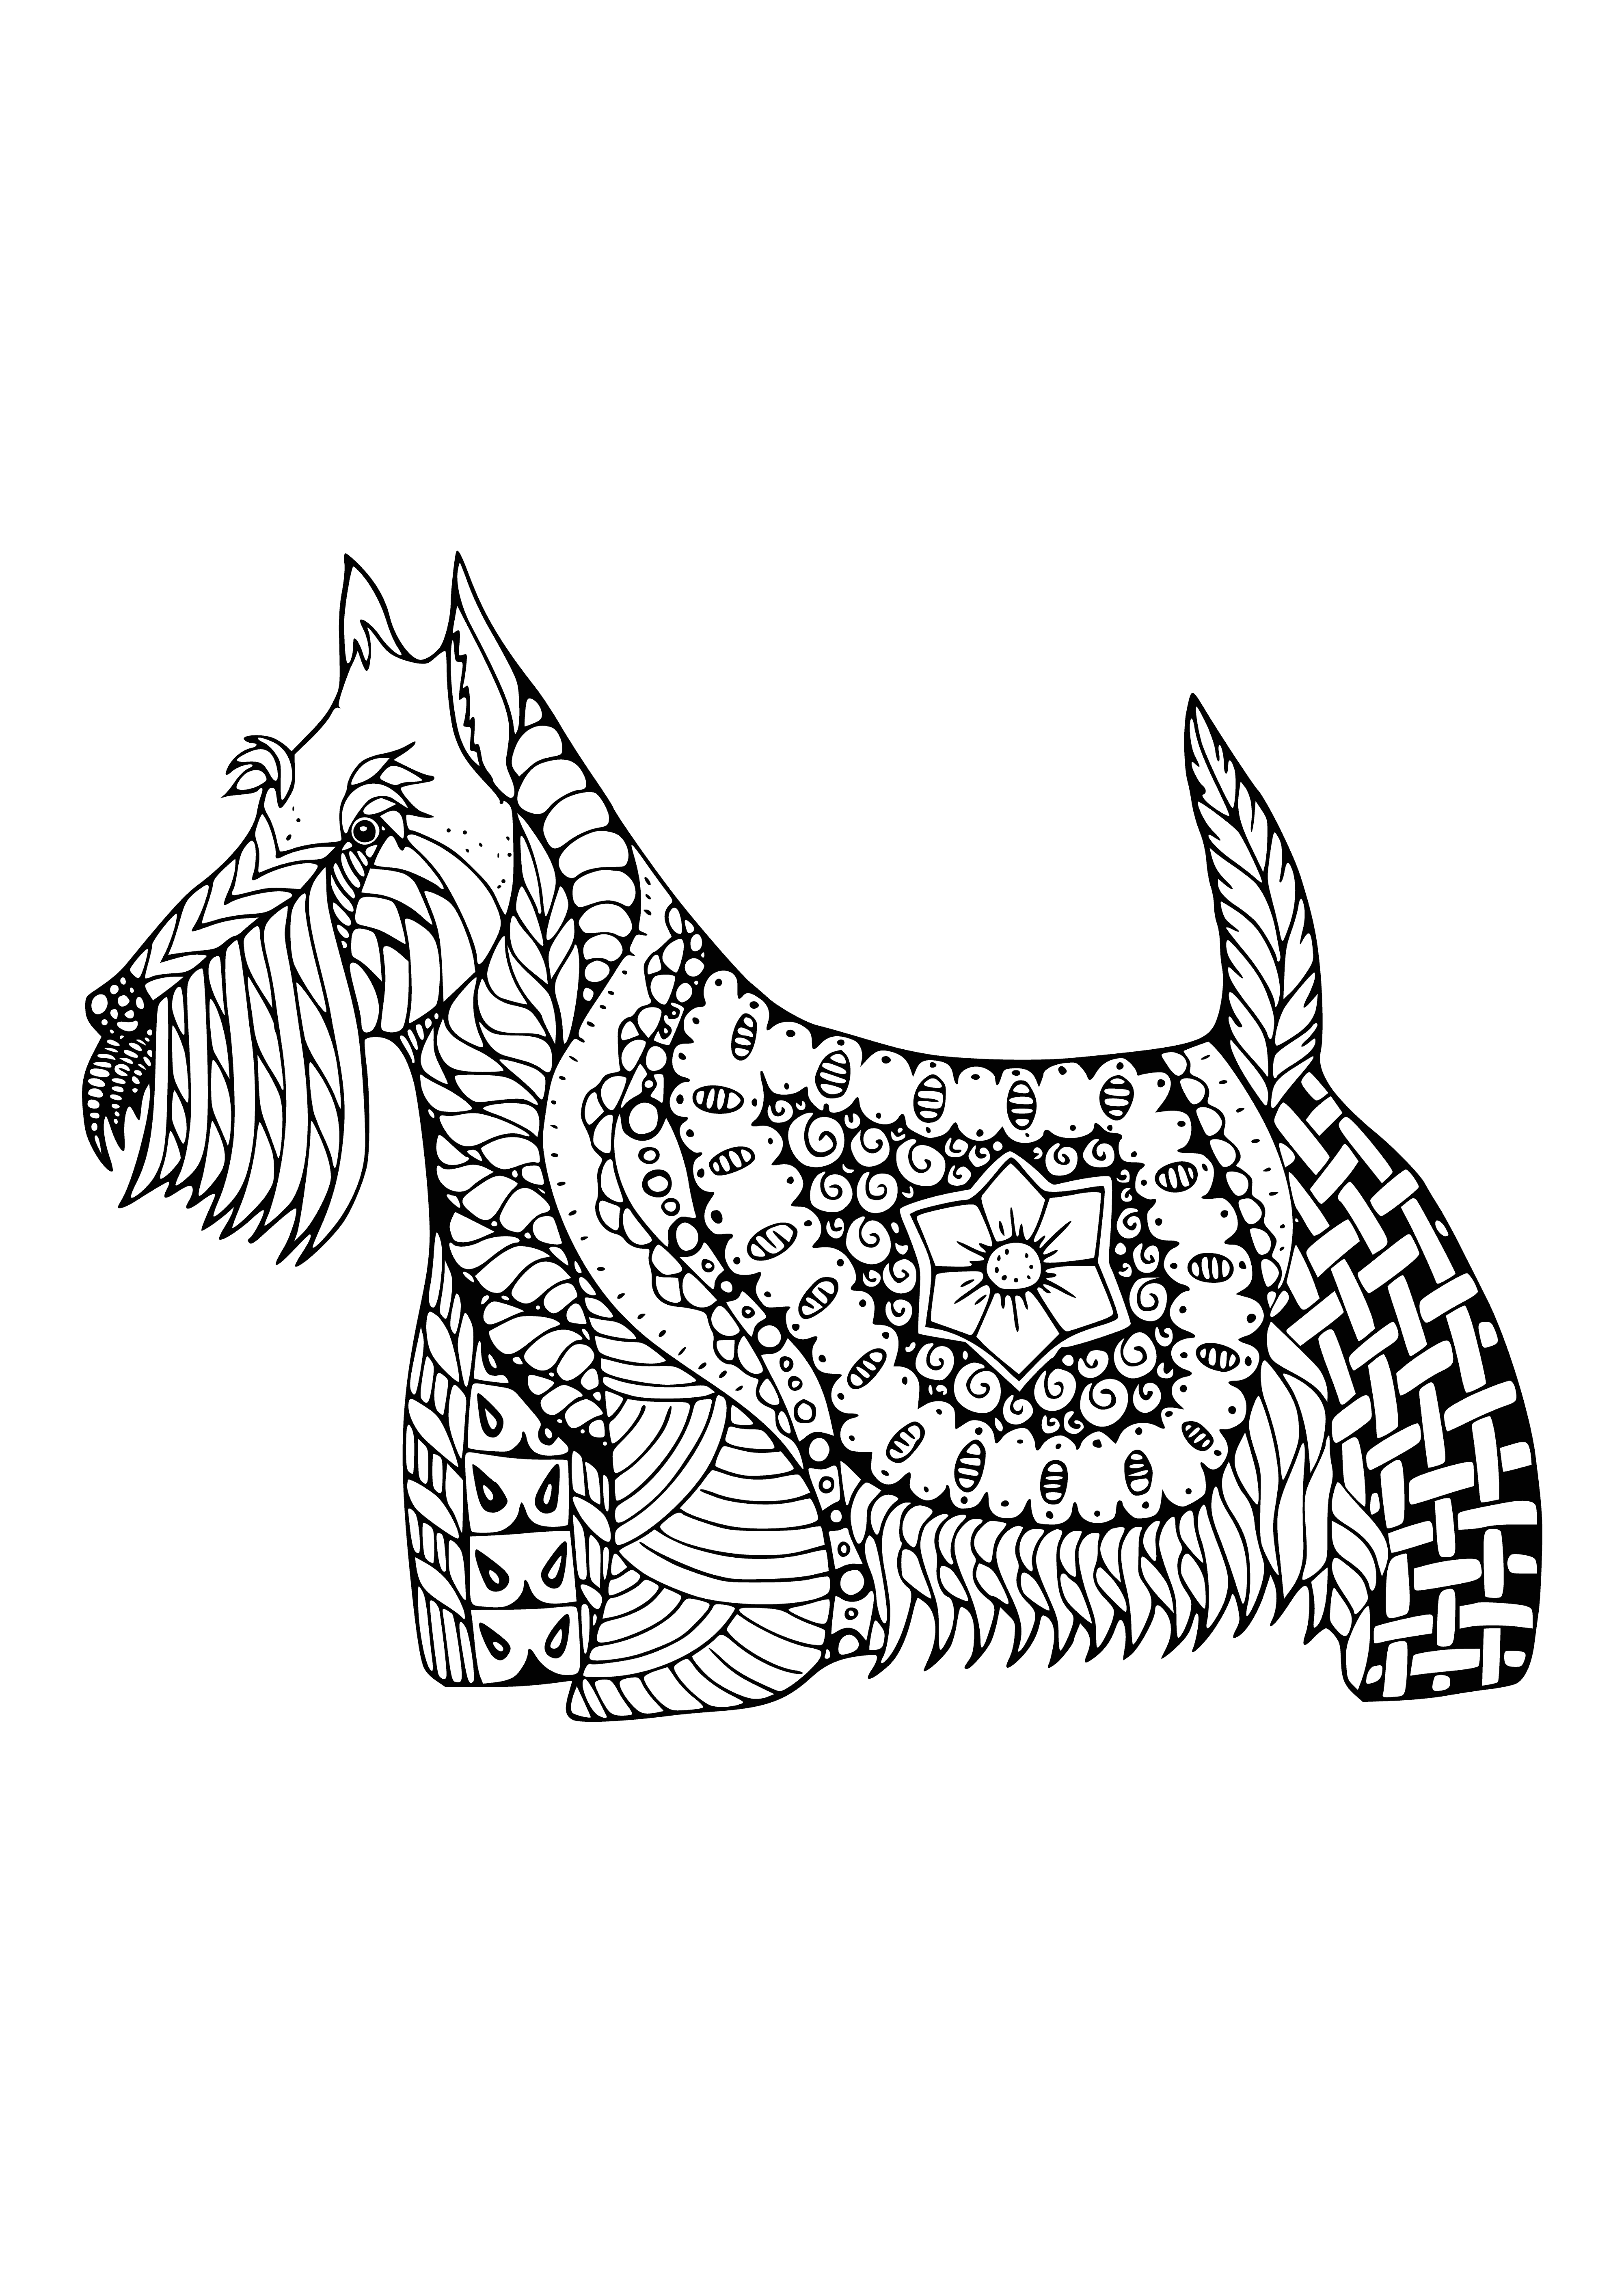 coloring page: A small black and white dog sits in front of the TV, looking at the camera with its head tilted.